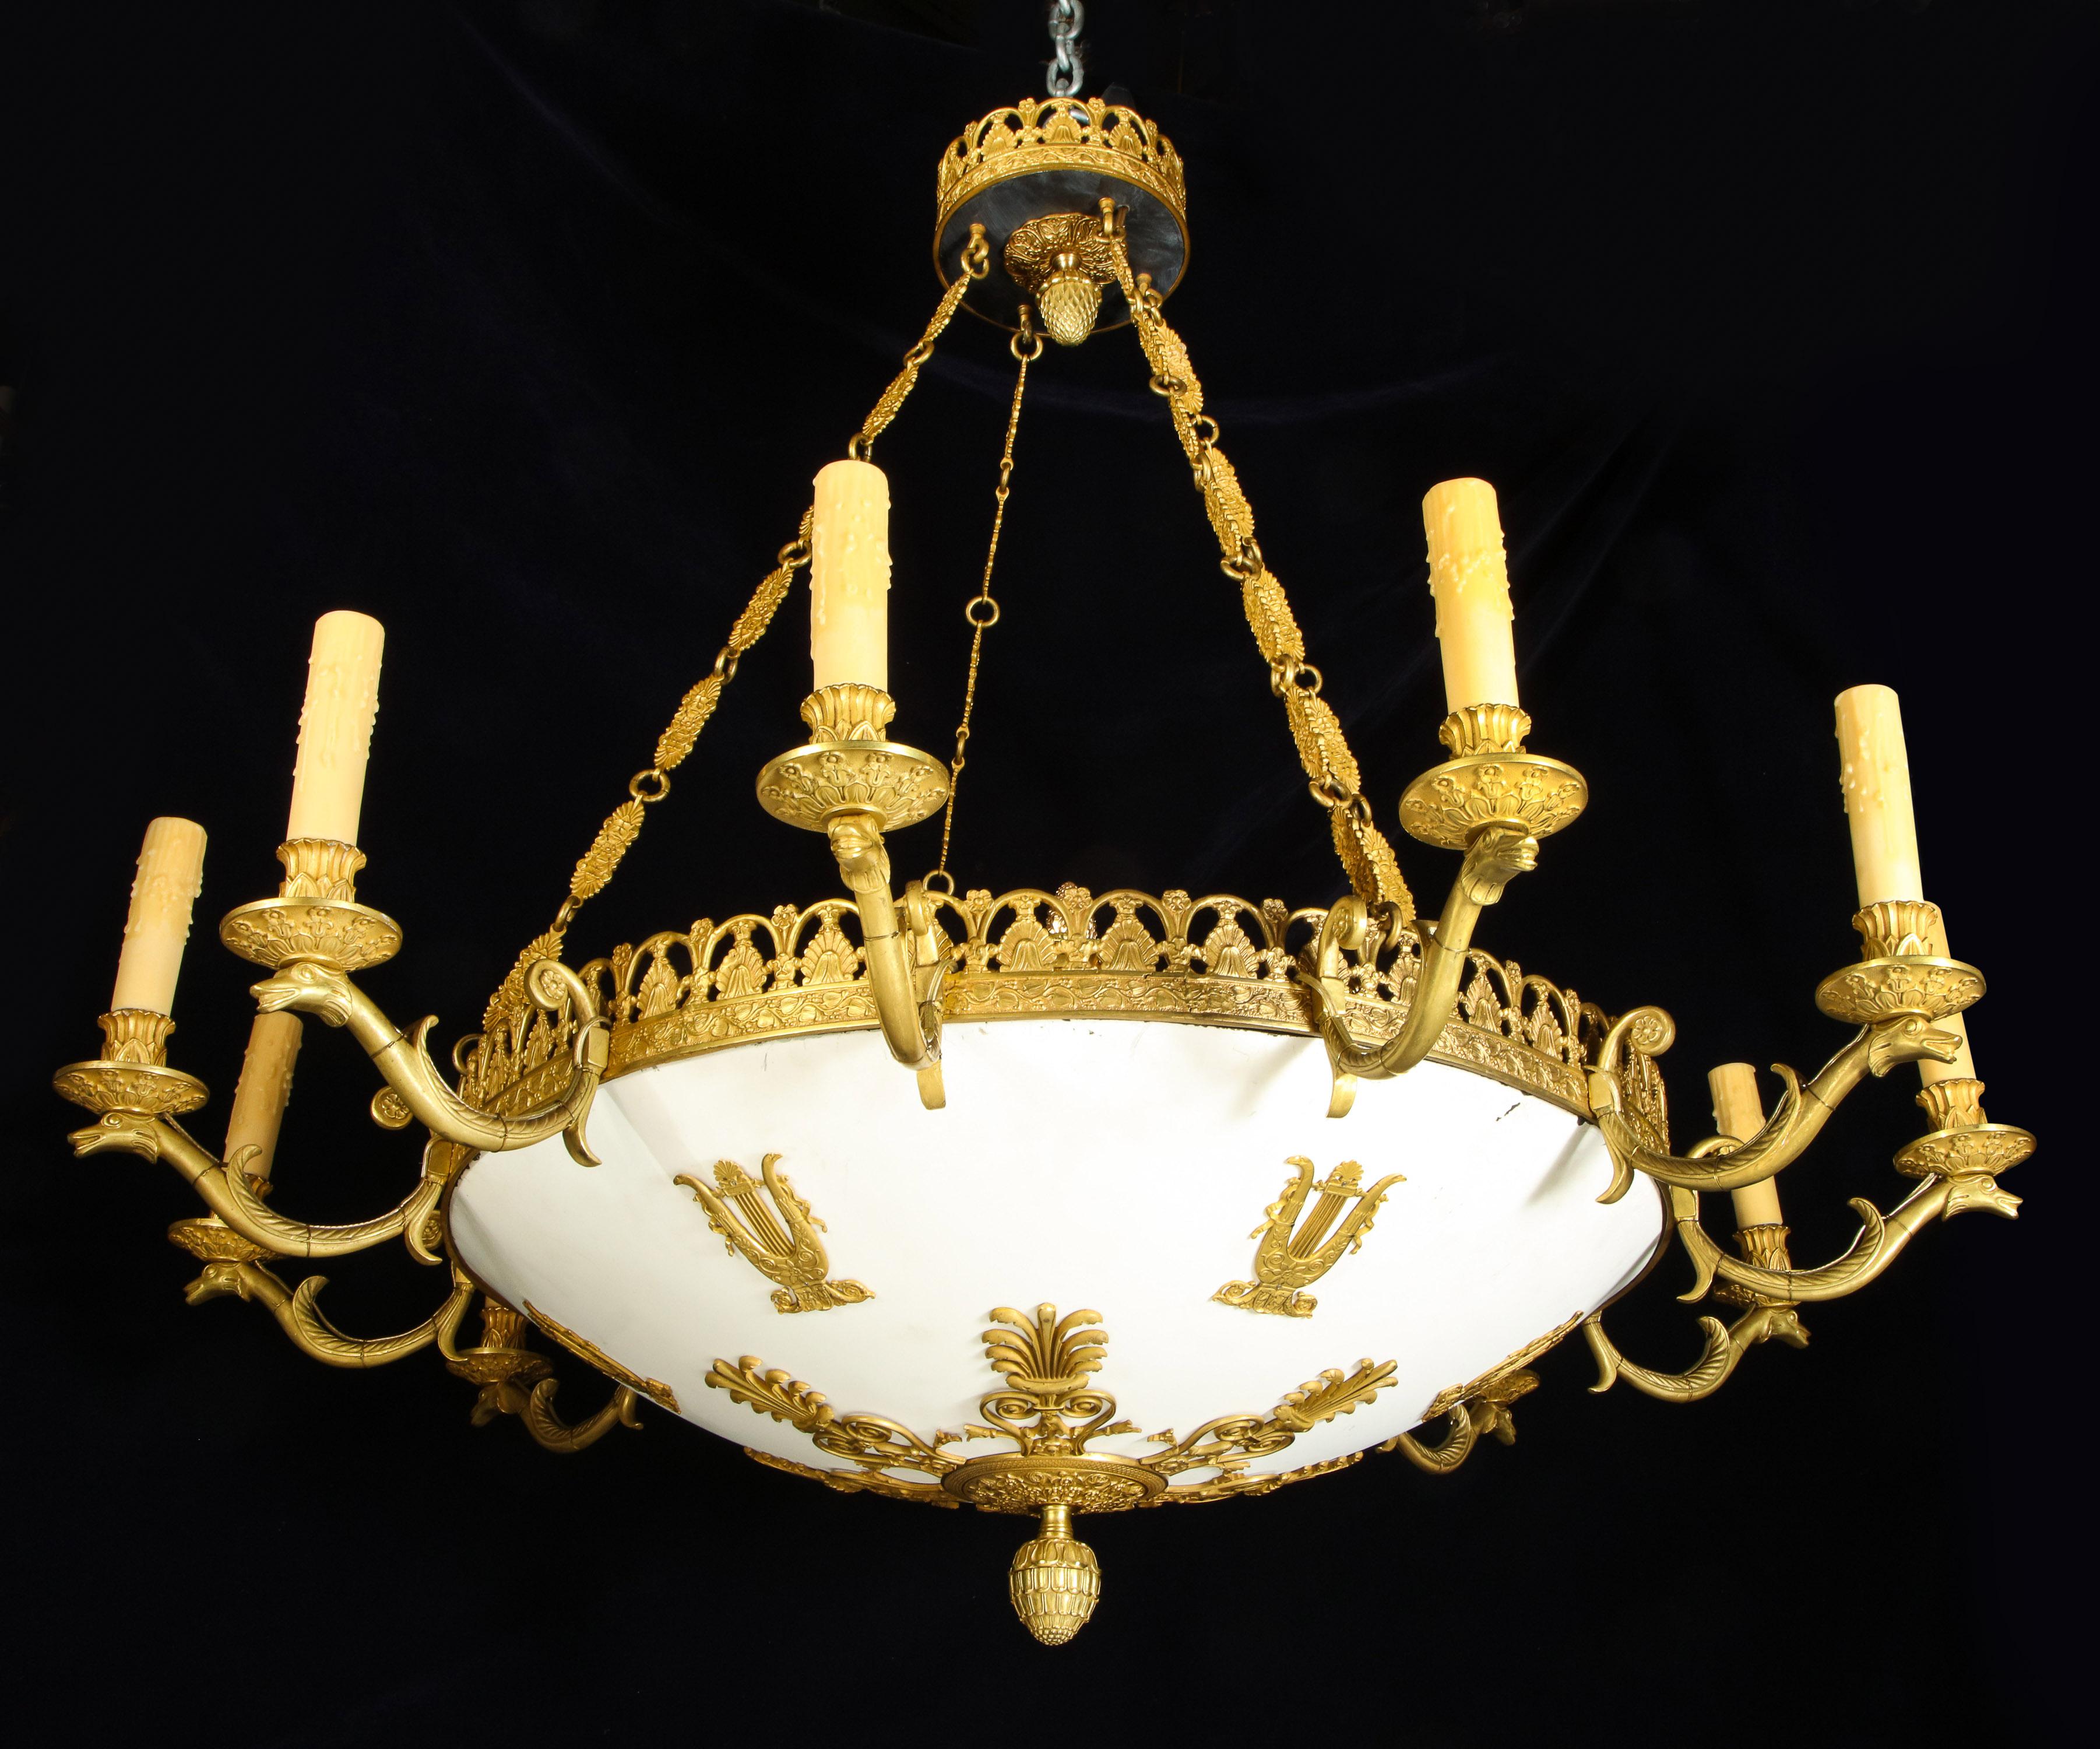 Pair of Large and Important Antique French Empire Gilt Bronze Chandeliers For Sale 9